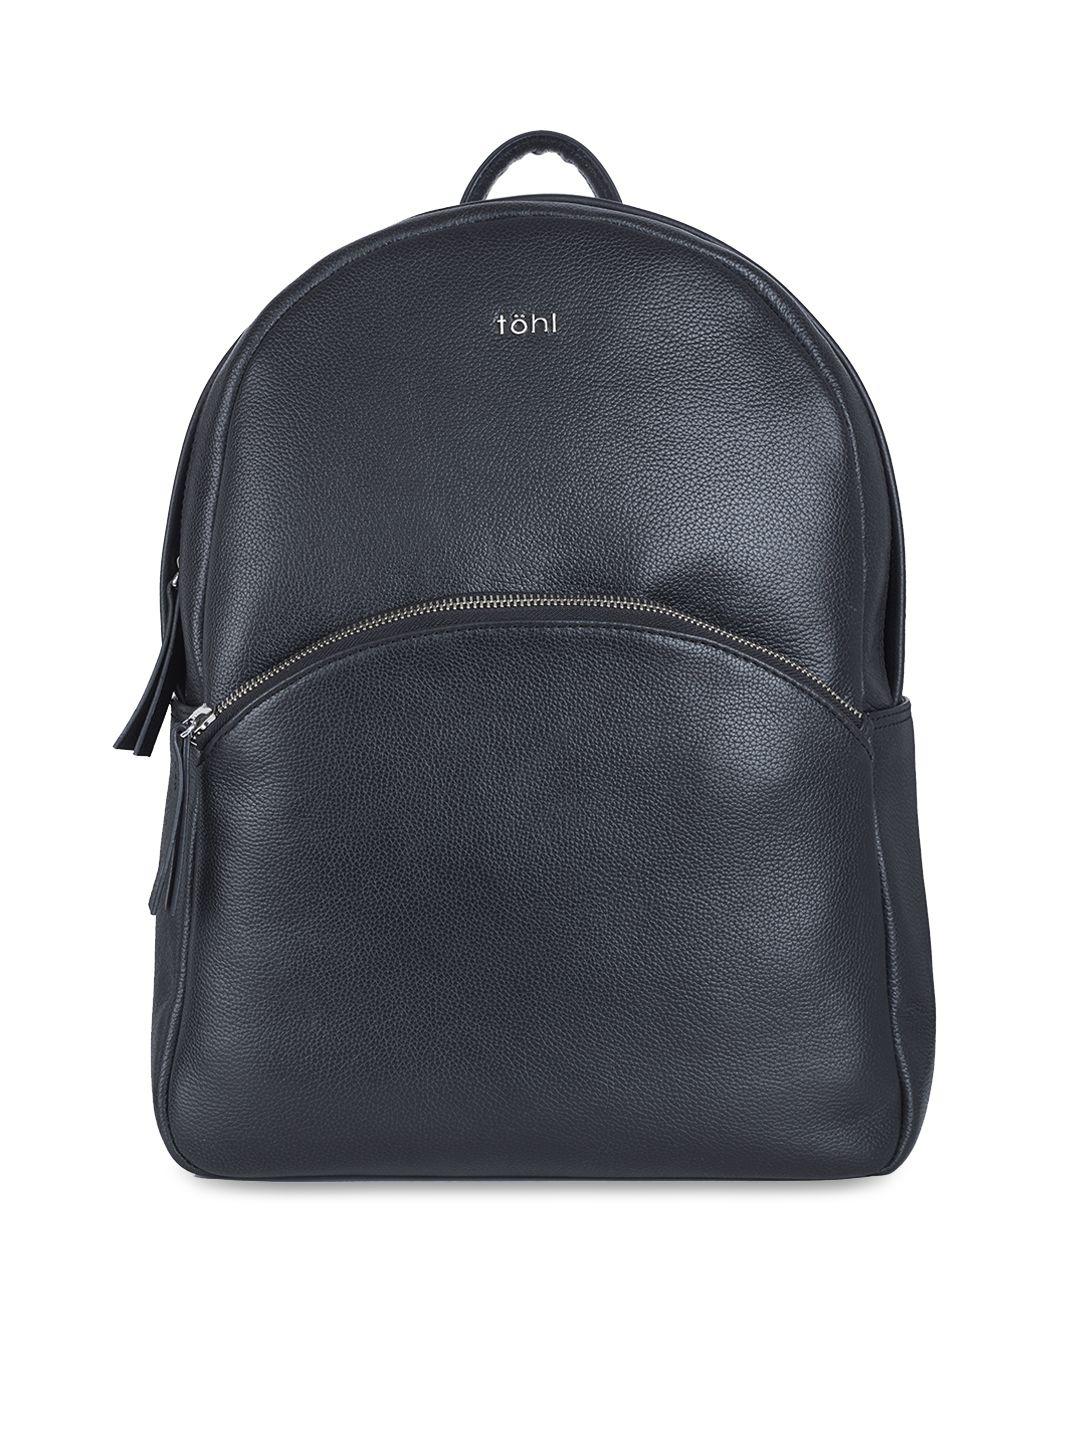 tohl women black textured backpack